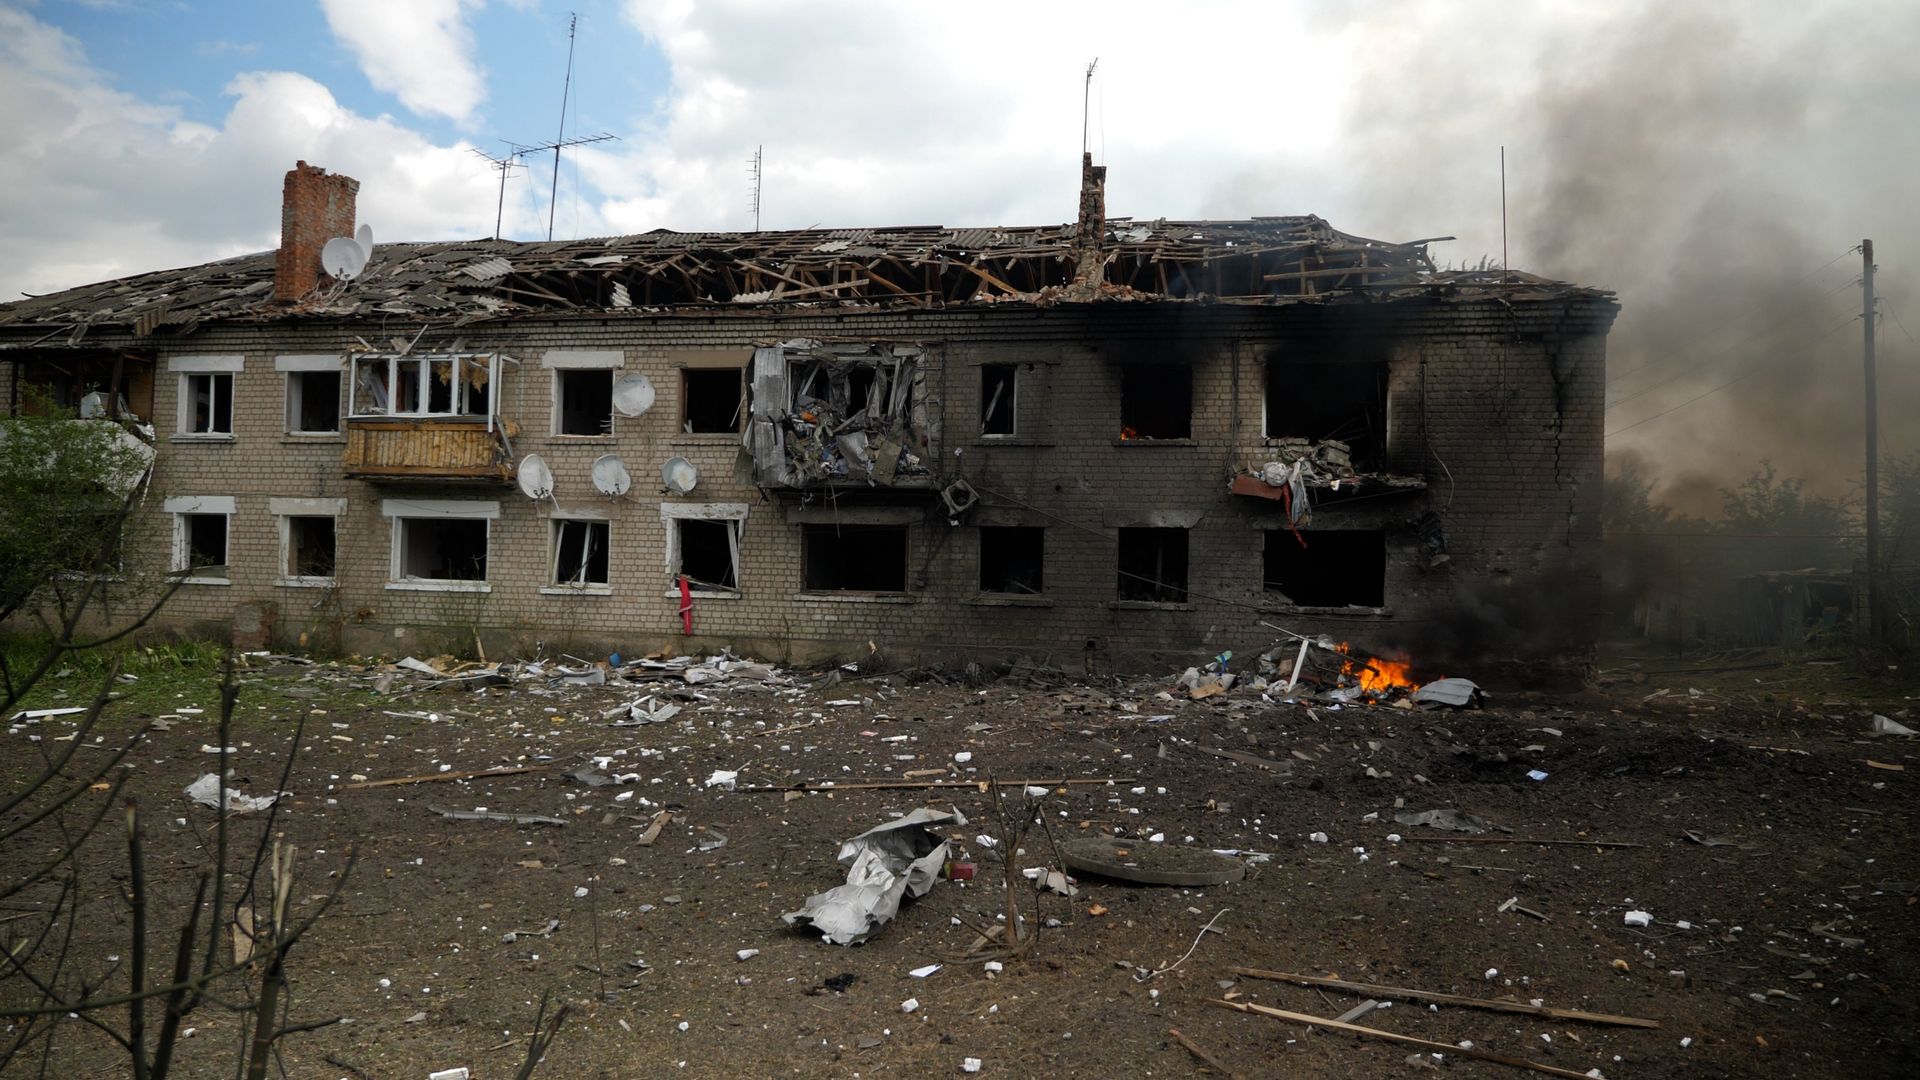 'Everyone is suffering': Inside the town being flattened in Russian offensive